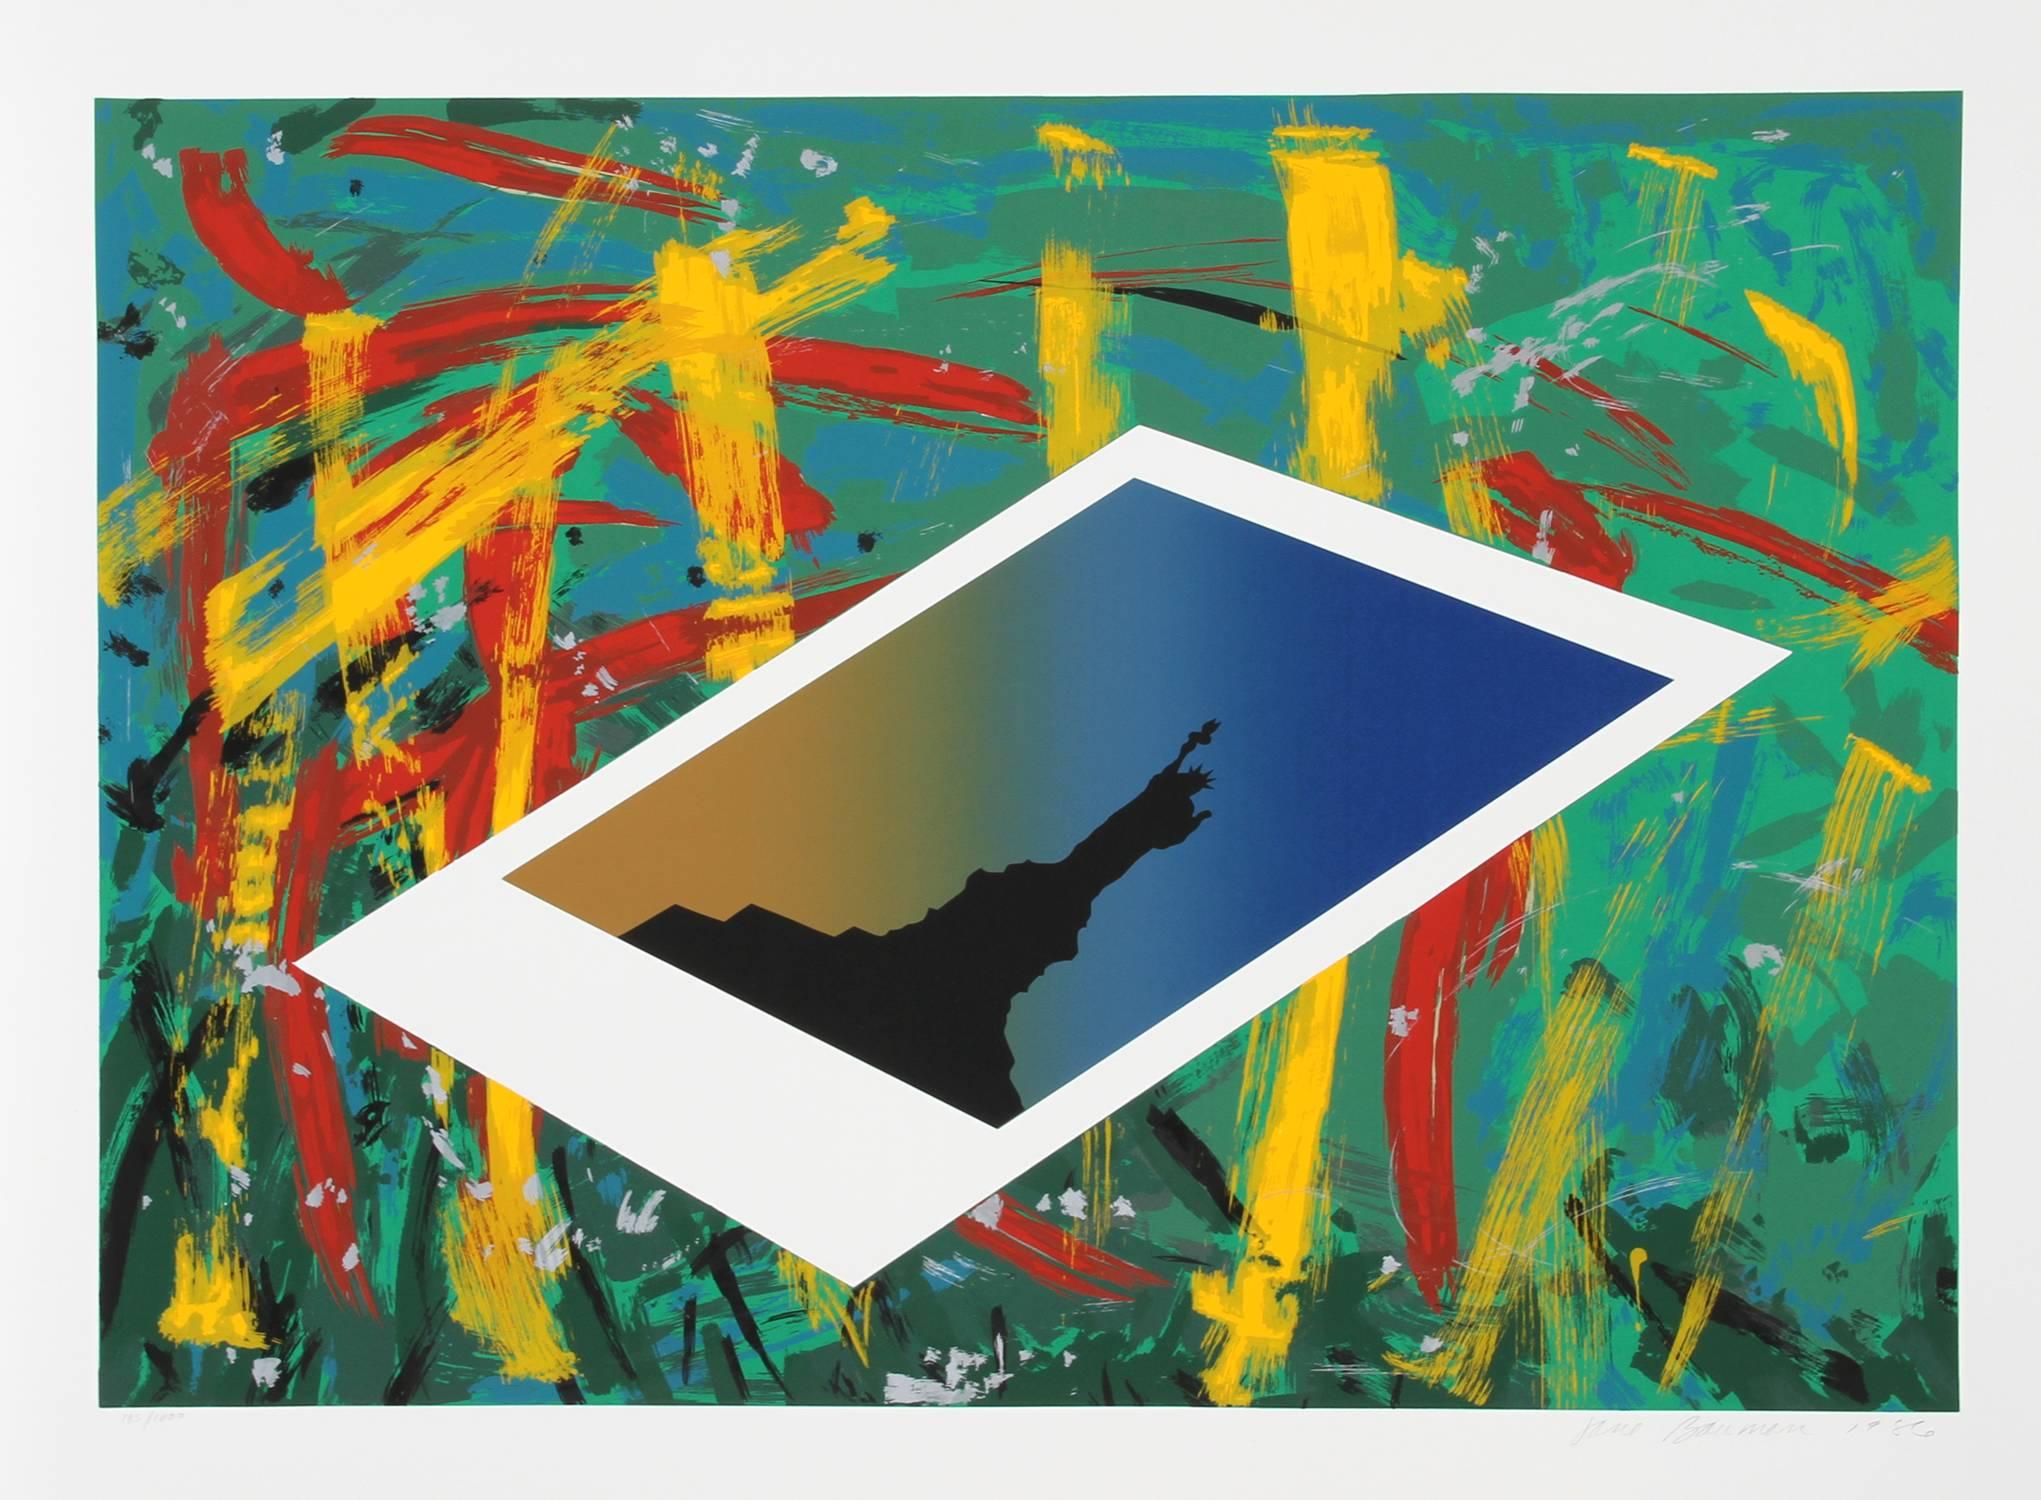 Artist:  Jane Bauman, American
Title: Liberty
Year: 1986
Medium: Silkscreen, signed and numbered in pencil 
Edition: 1000
Paper Size: 30 x 42 inches 